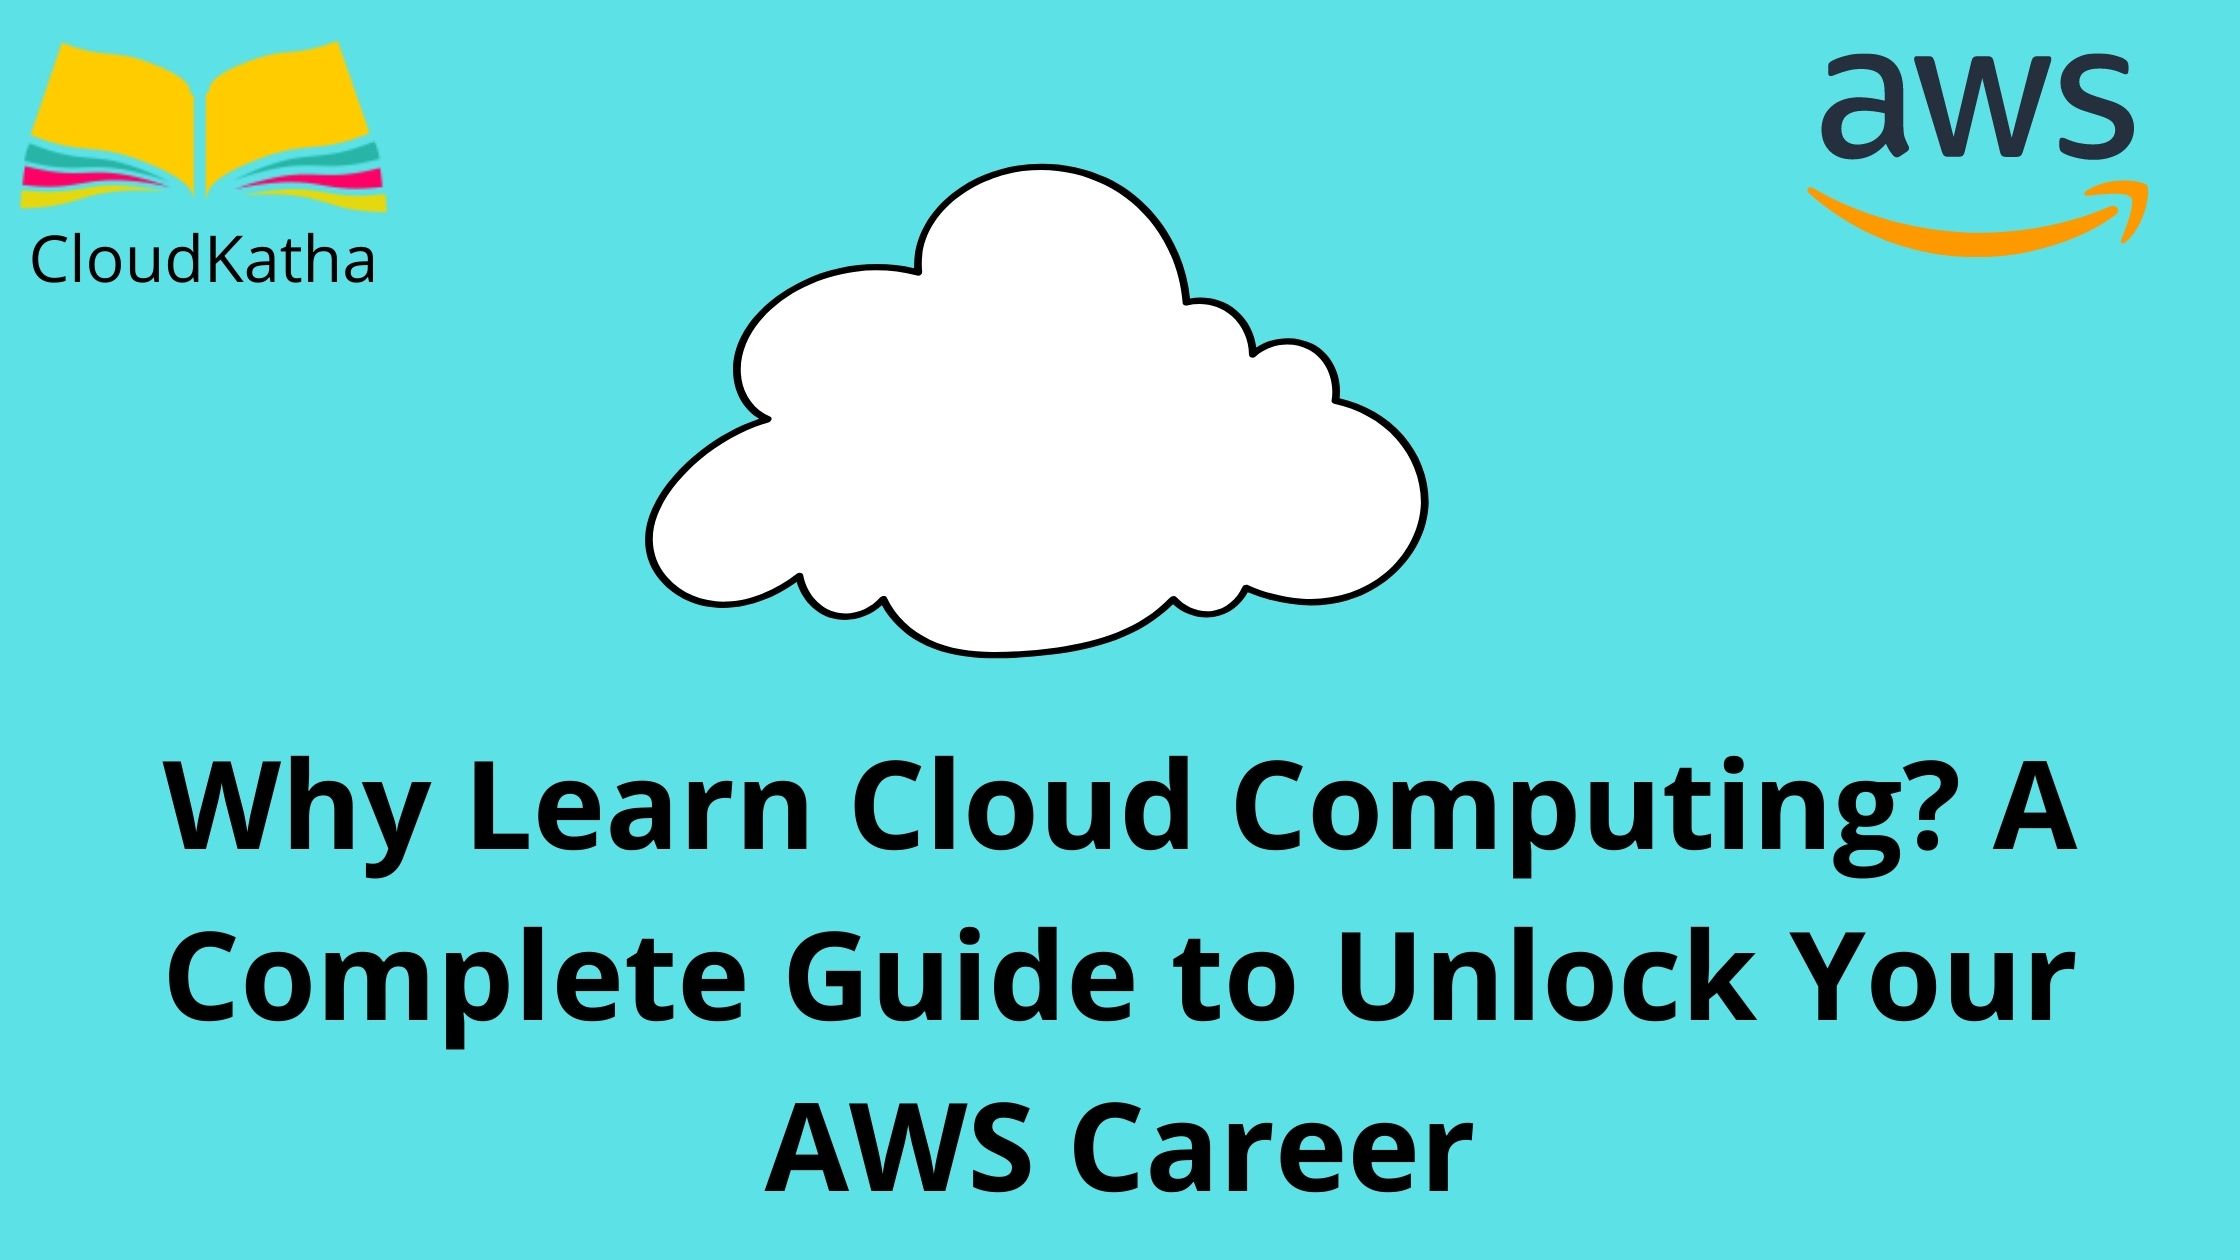 Why Learn Cloud Computing? A Complete Guide to Unlock Your AWS Career